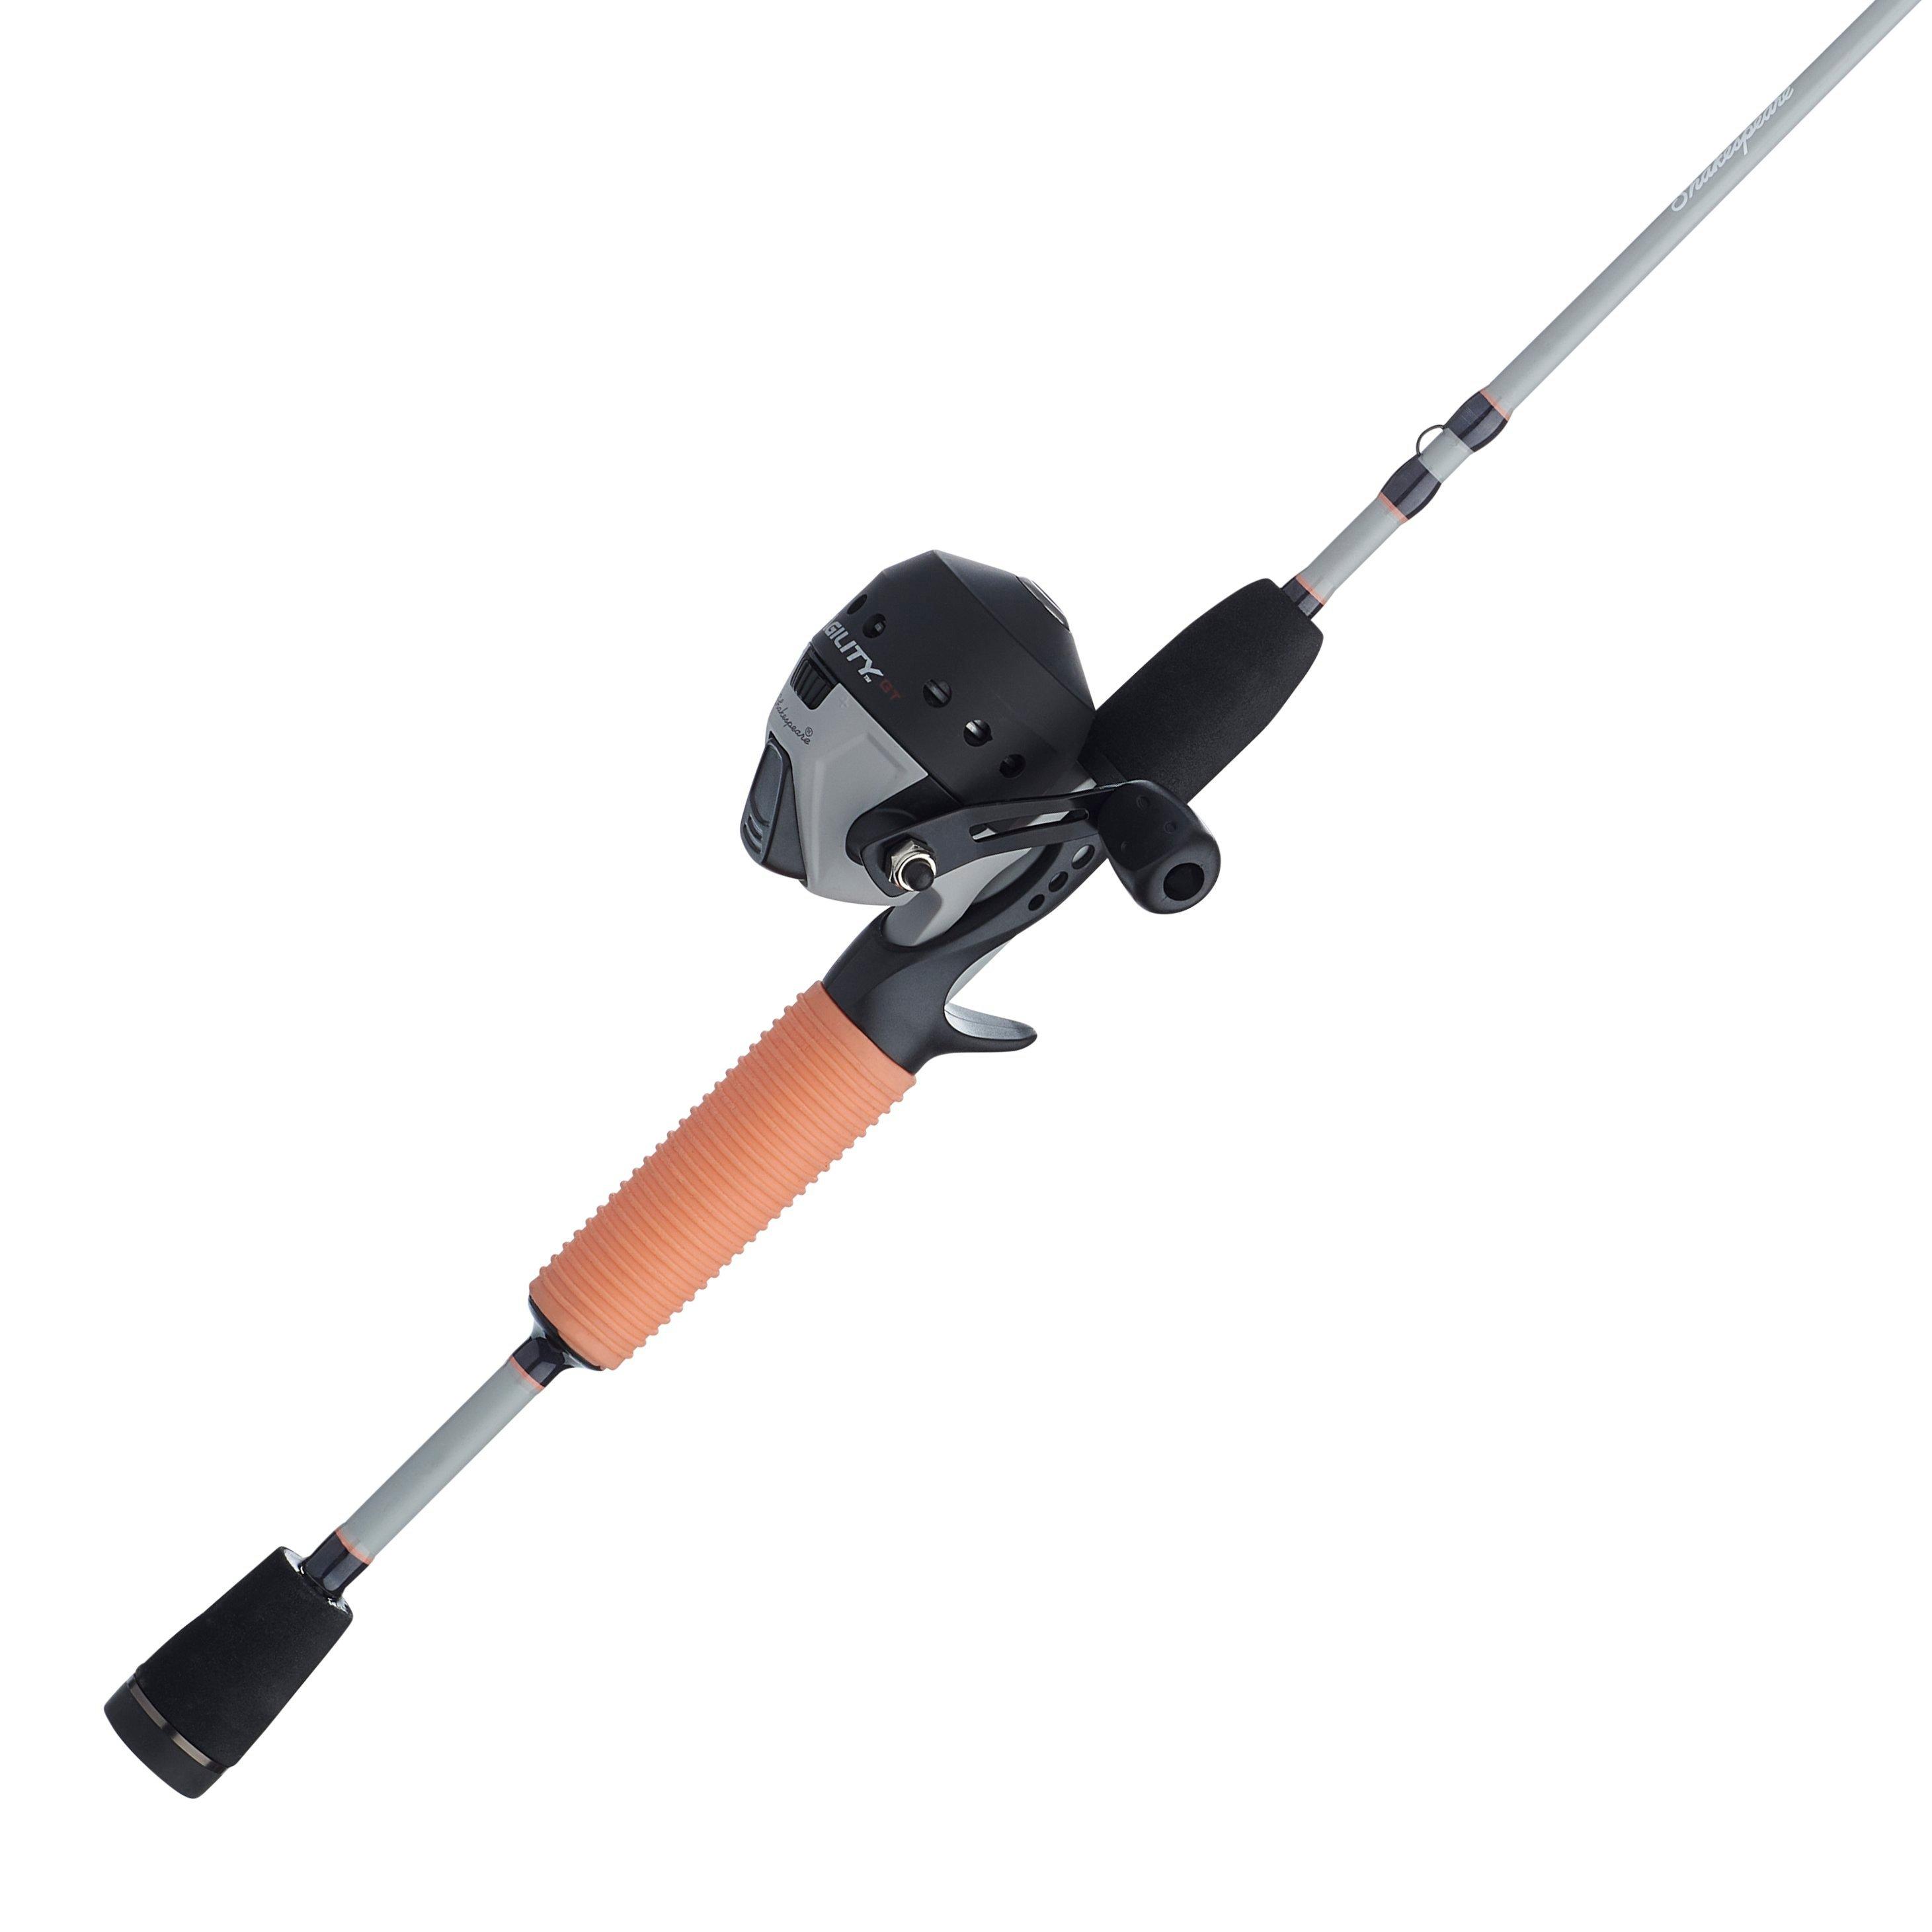 https://cs1.0ps.us/original/opplanet-shakespeare-lady-agility-gel-tech-spincast-combo-3-0-1-right-6-5ft-6in-rod-length-medium-power-fast-action-2-pieces-rod-coral-laggt6-562m-main